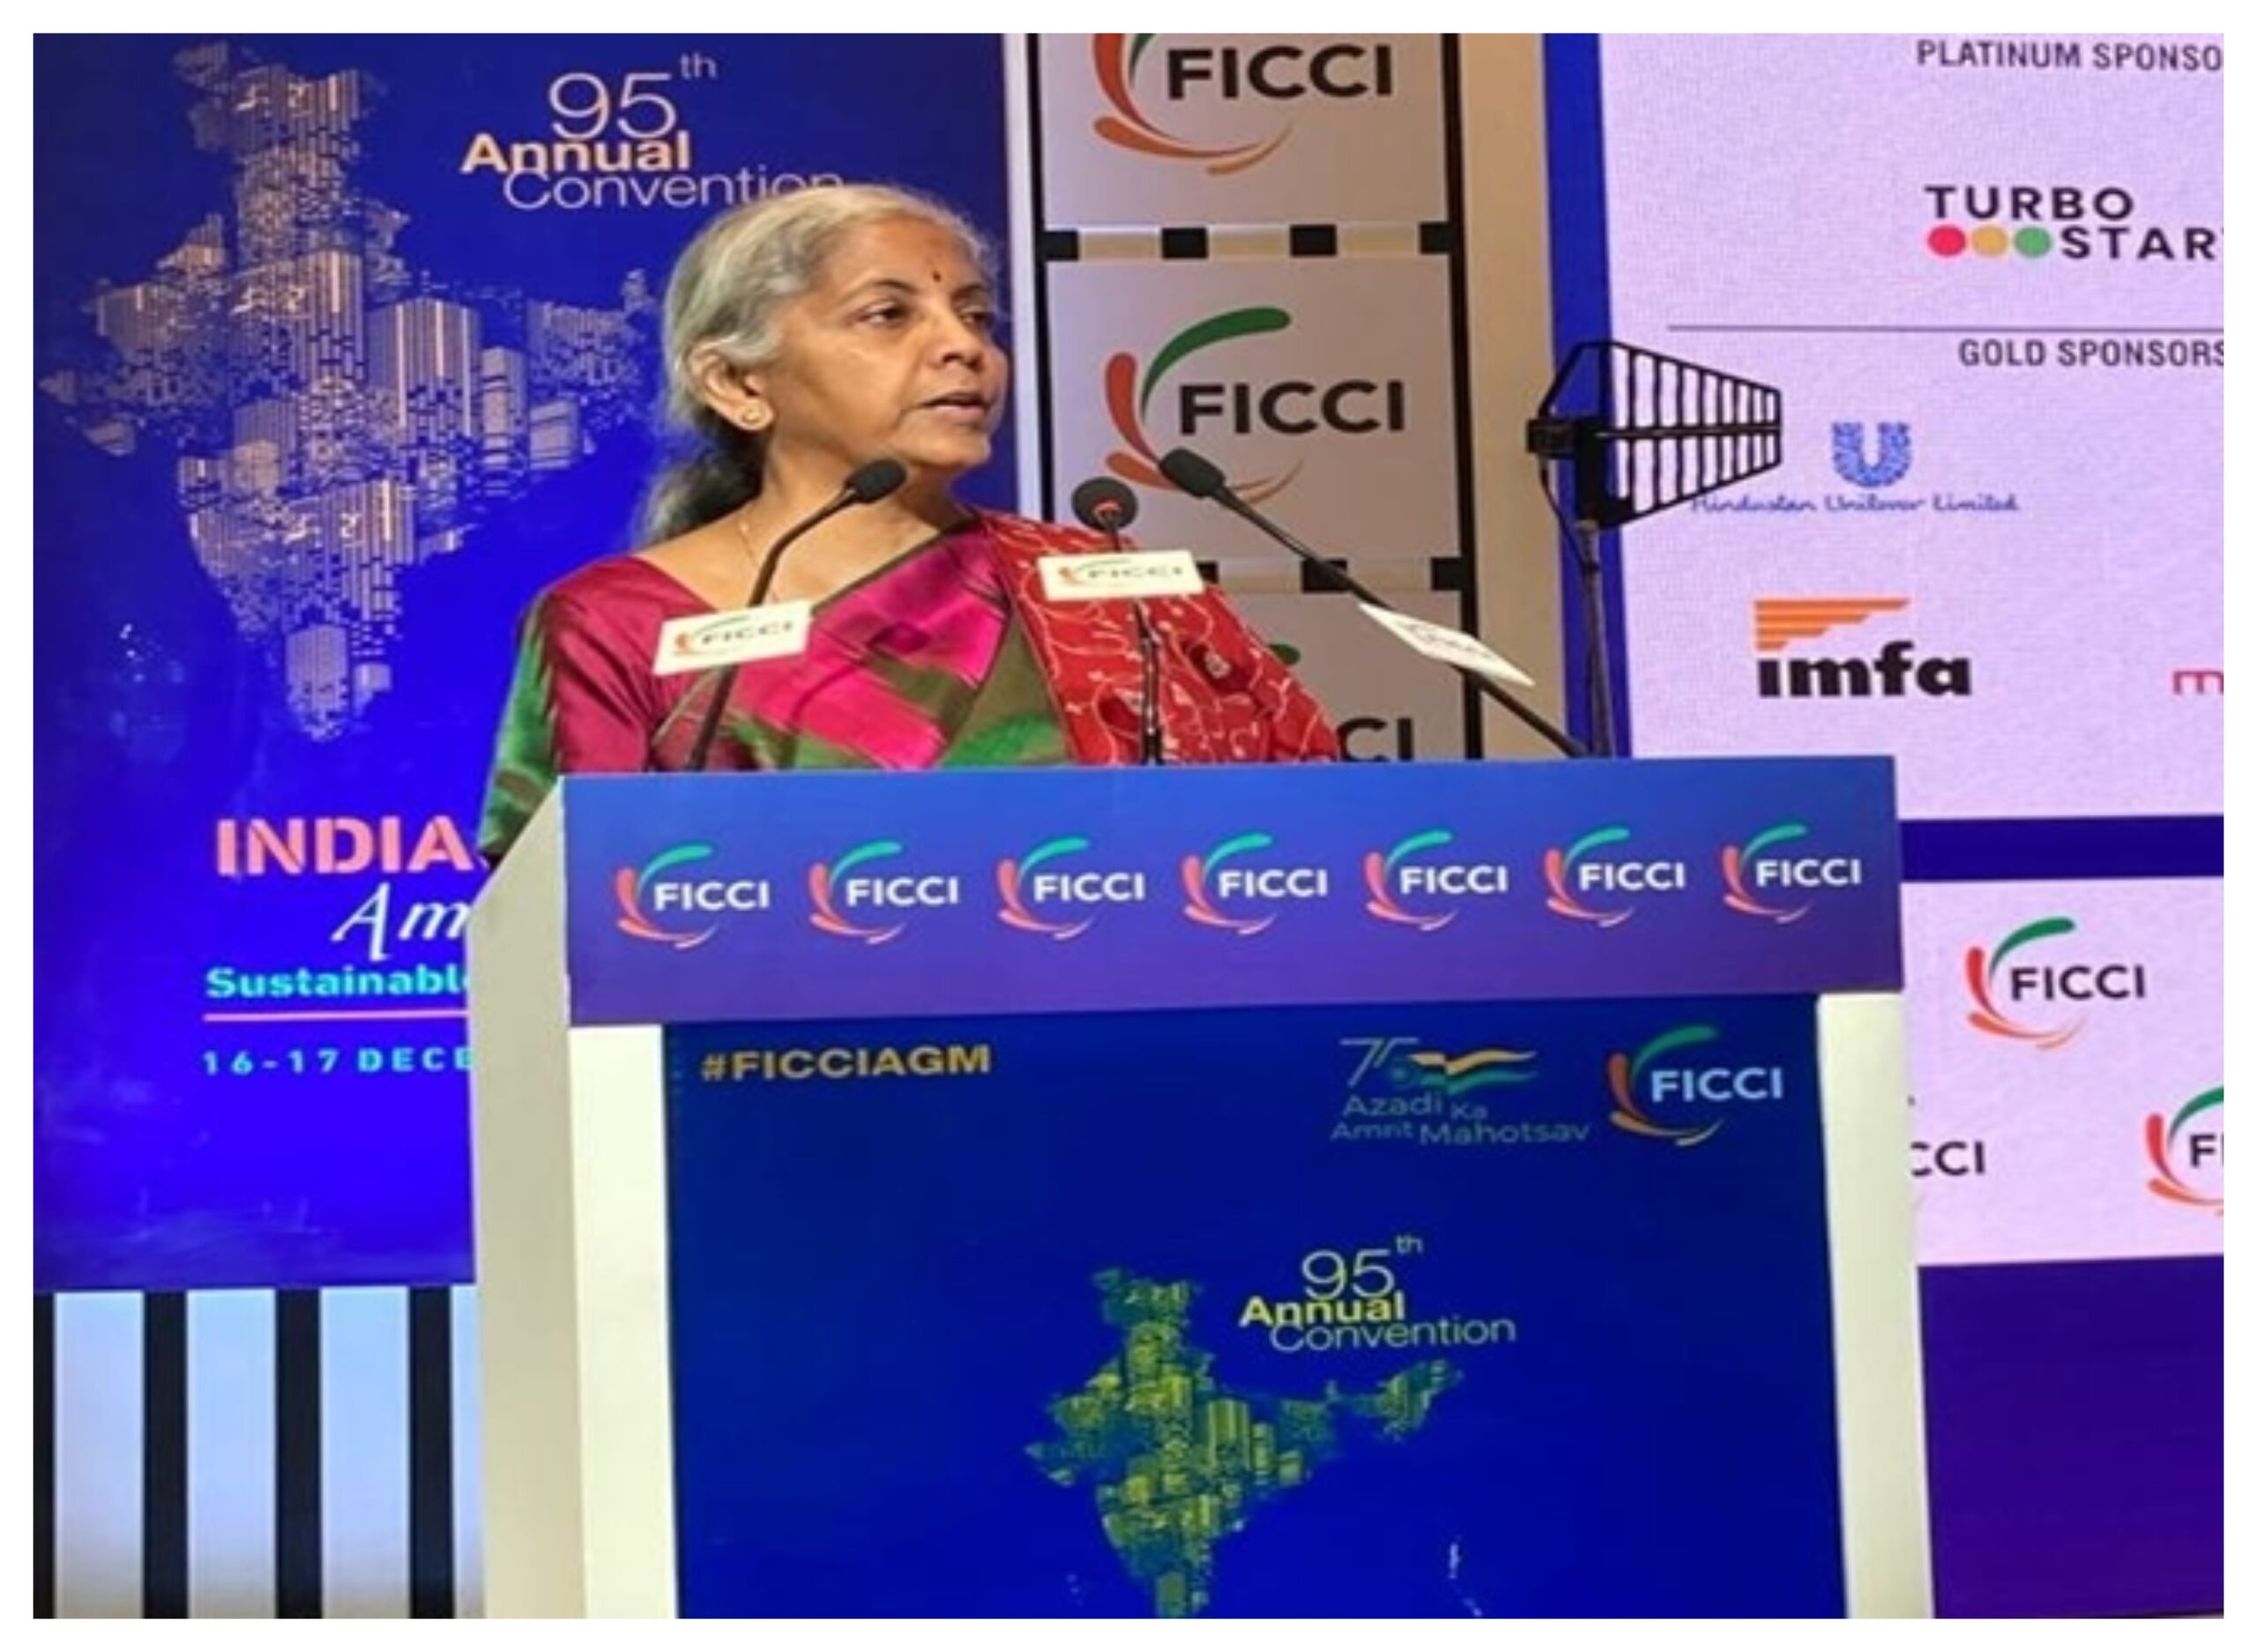 FICCI: If India develops, Indian industry will be the first contributor and beneficiary - Nirmala Sitharaman, Federation of Indian Chambers of Commerce and IndustryN news in hindi